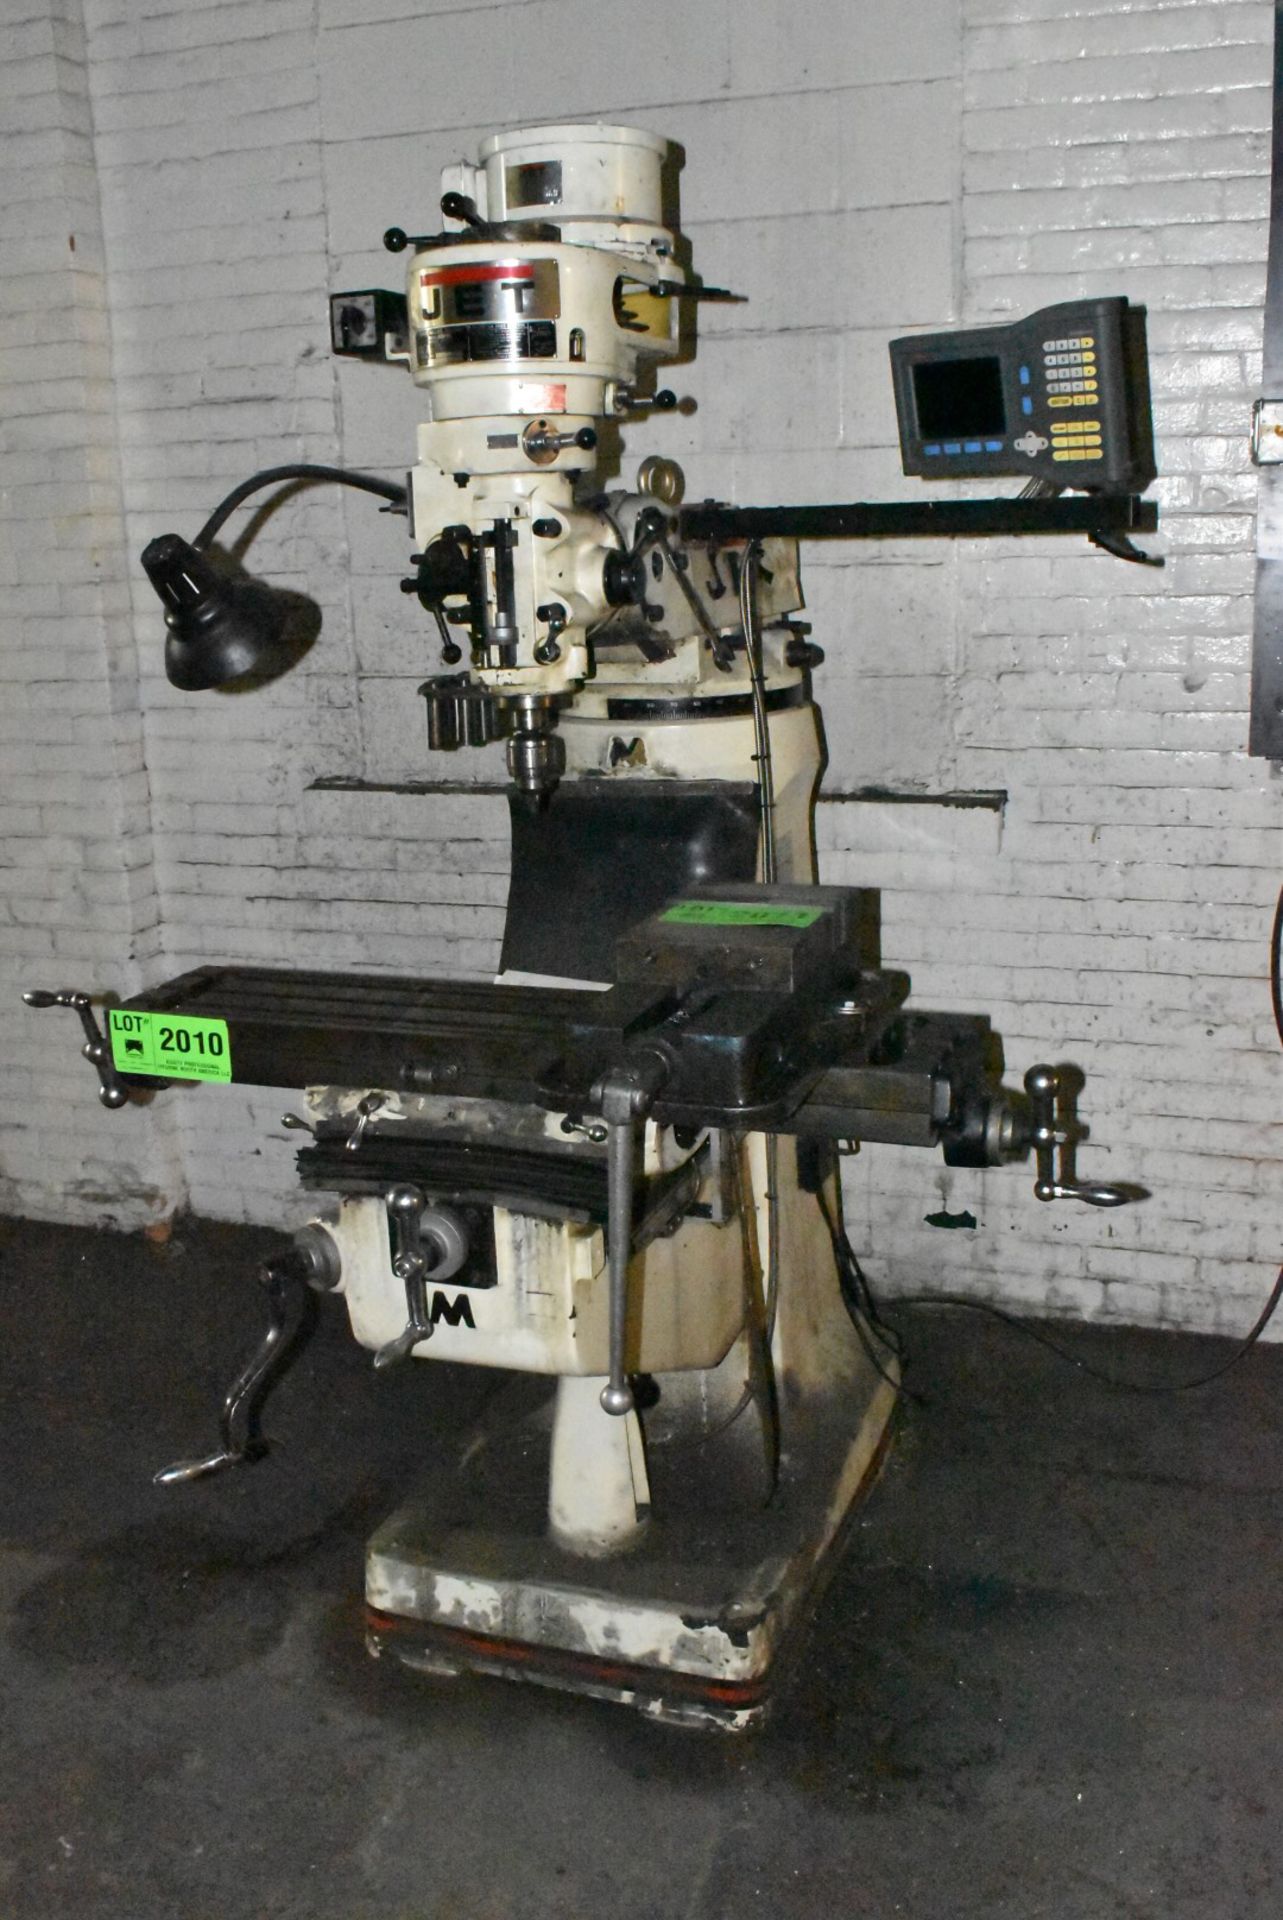 JET (2010) JTM-1 VERTICAL TURRET MILLING MACHINE WITH 9" X 42" TABLE, SPEEDS TO 2720 RPM IN 8 STEPS, - Image 3 of 9